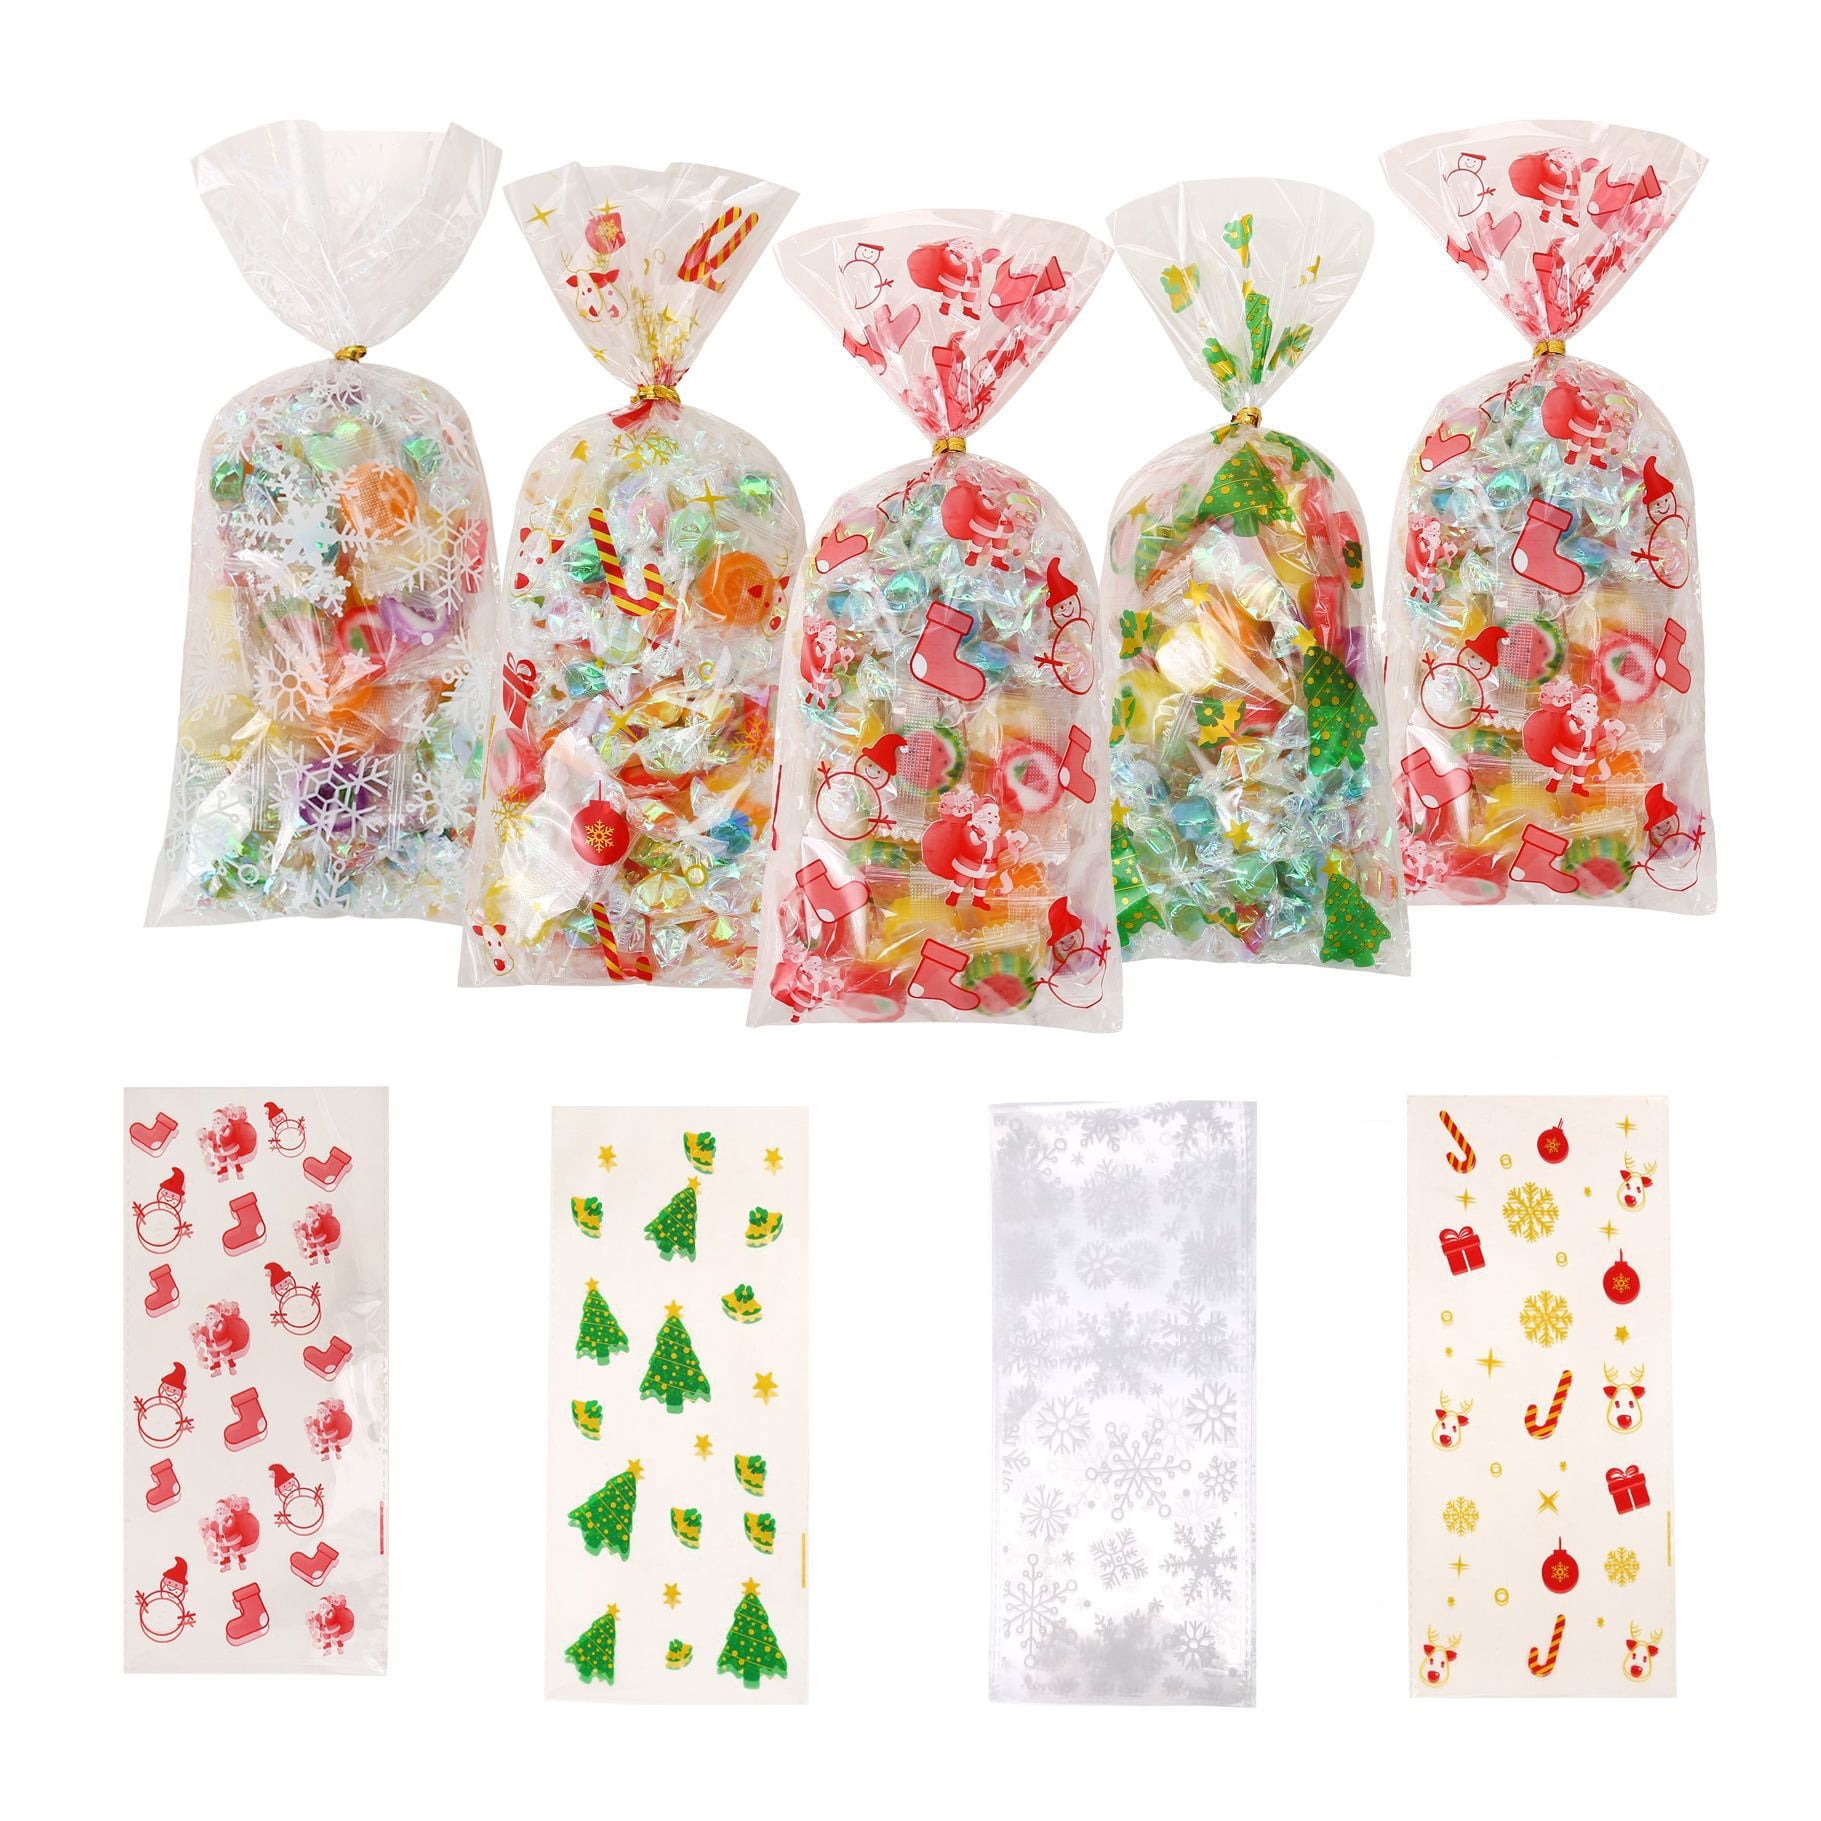 20 X Santa Cellophane Christmas Favour Treat Sweet Party Loot Bags With Ties 